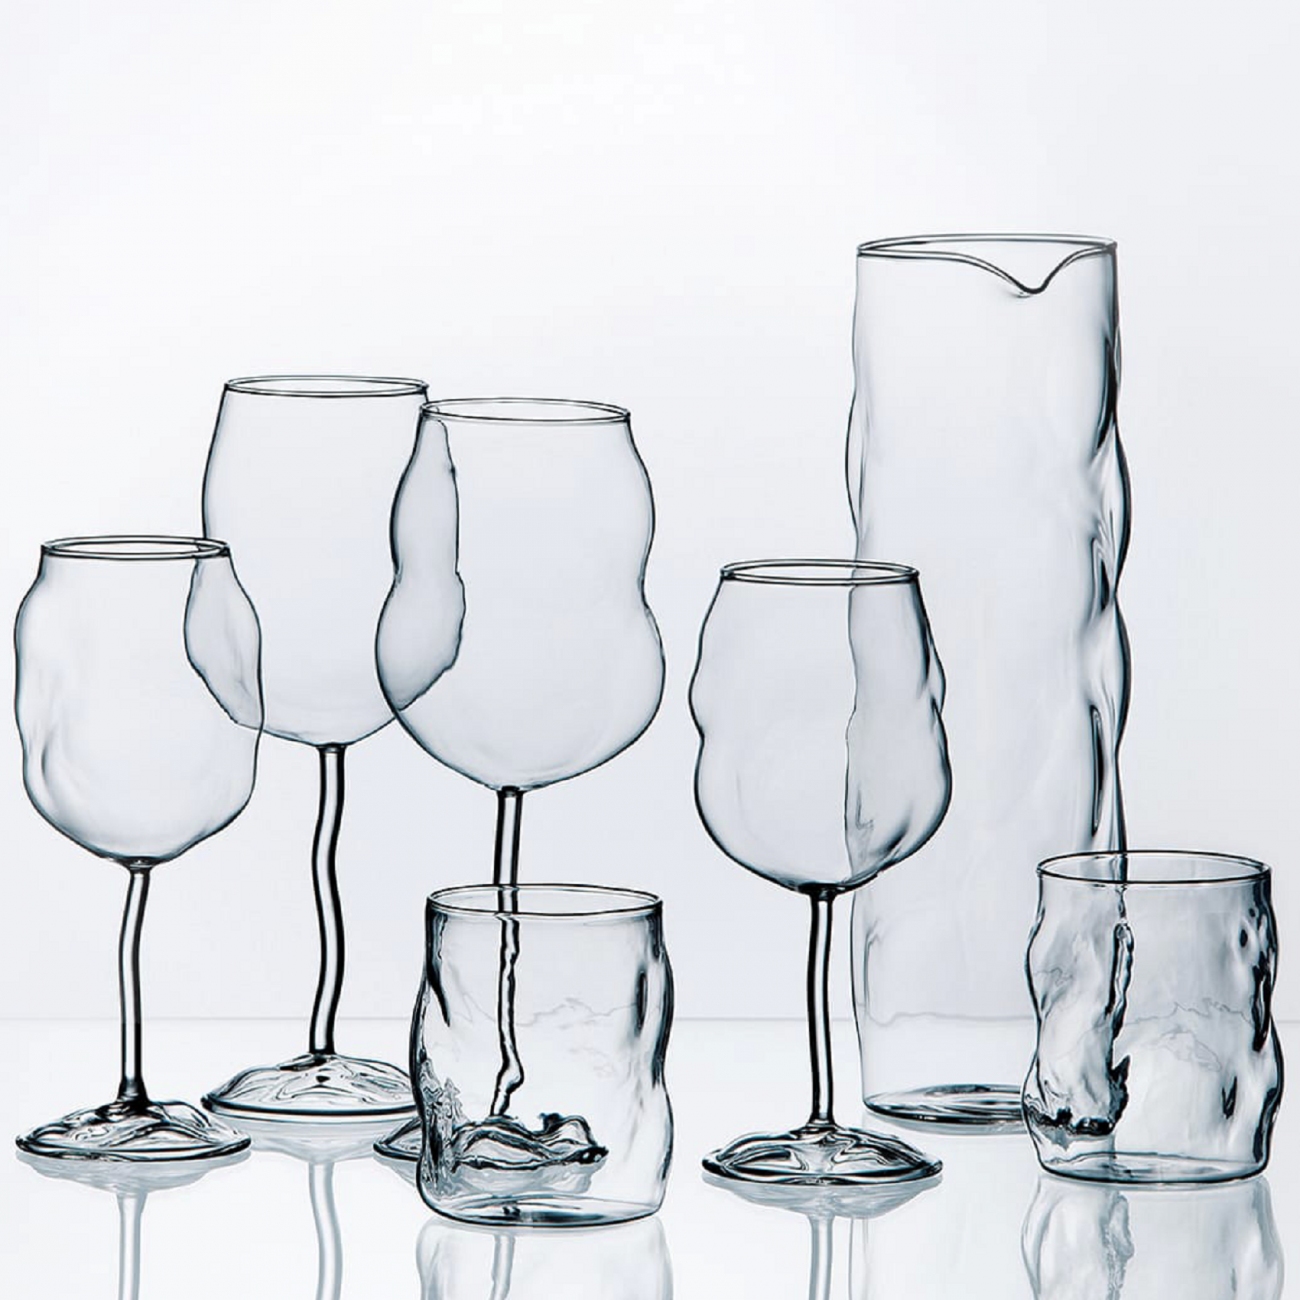 SELETTI "GLASS FROM SONNY" 